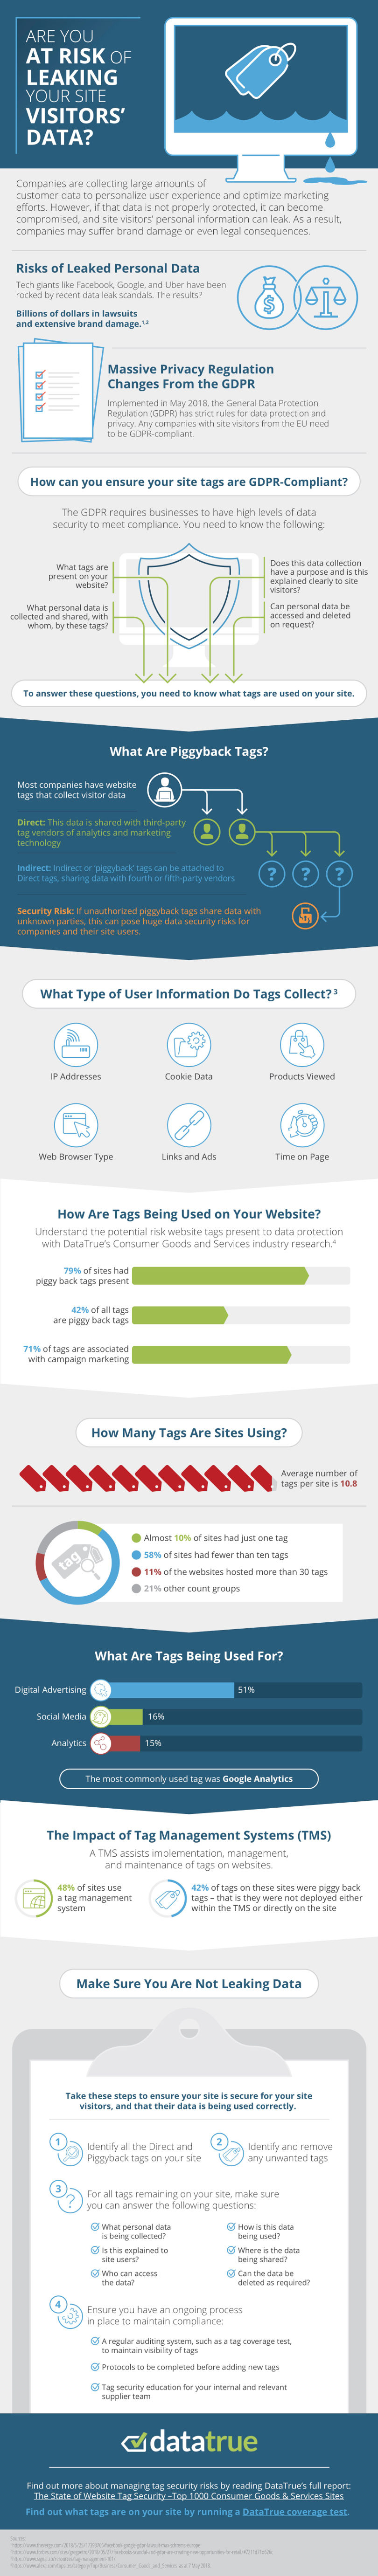 The risk of leaking site visitors data - infographic